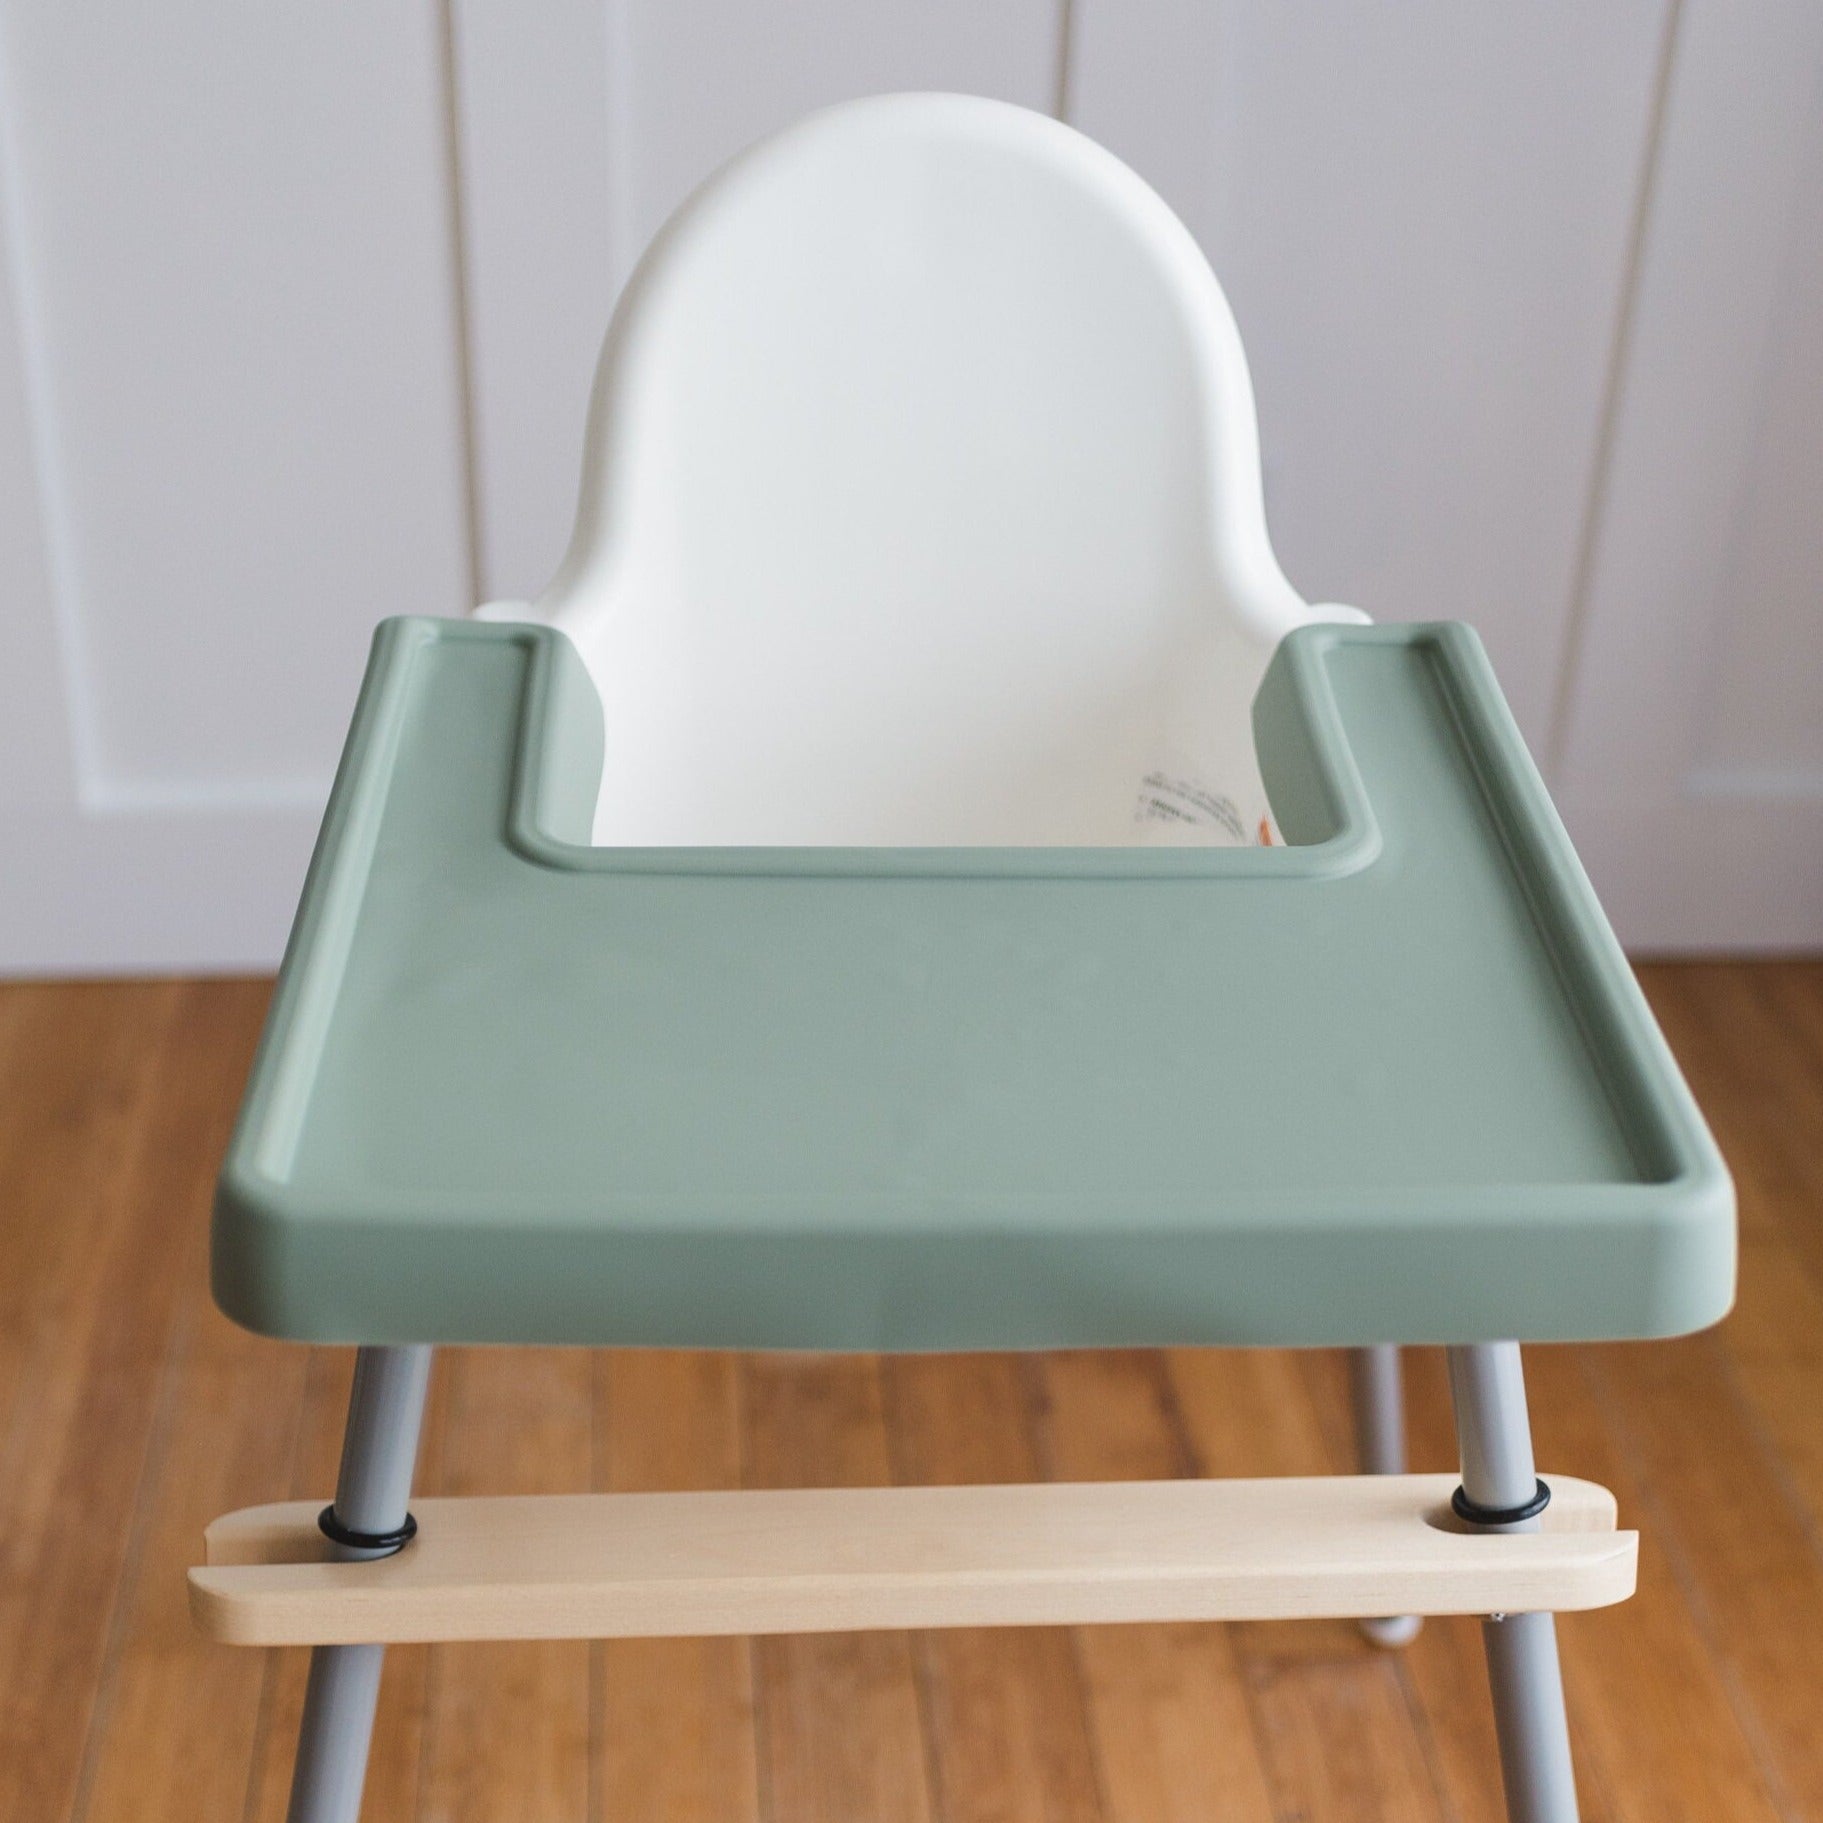 Full-Coverage IKEA High Chair Placemat - more colors